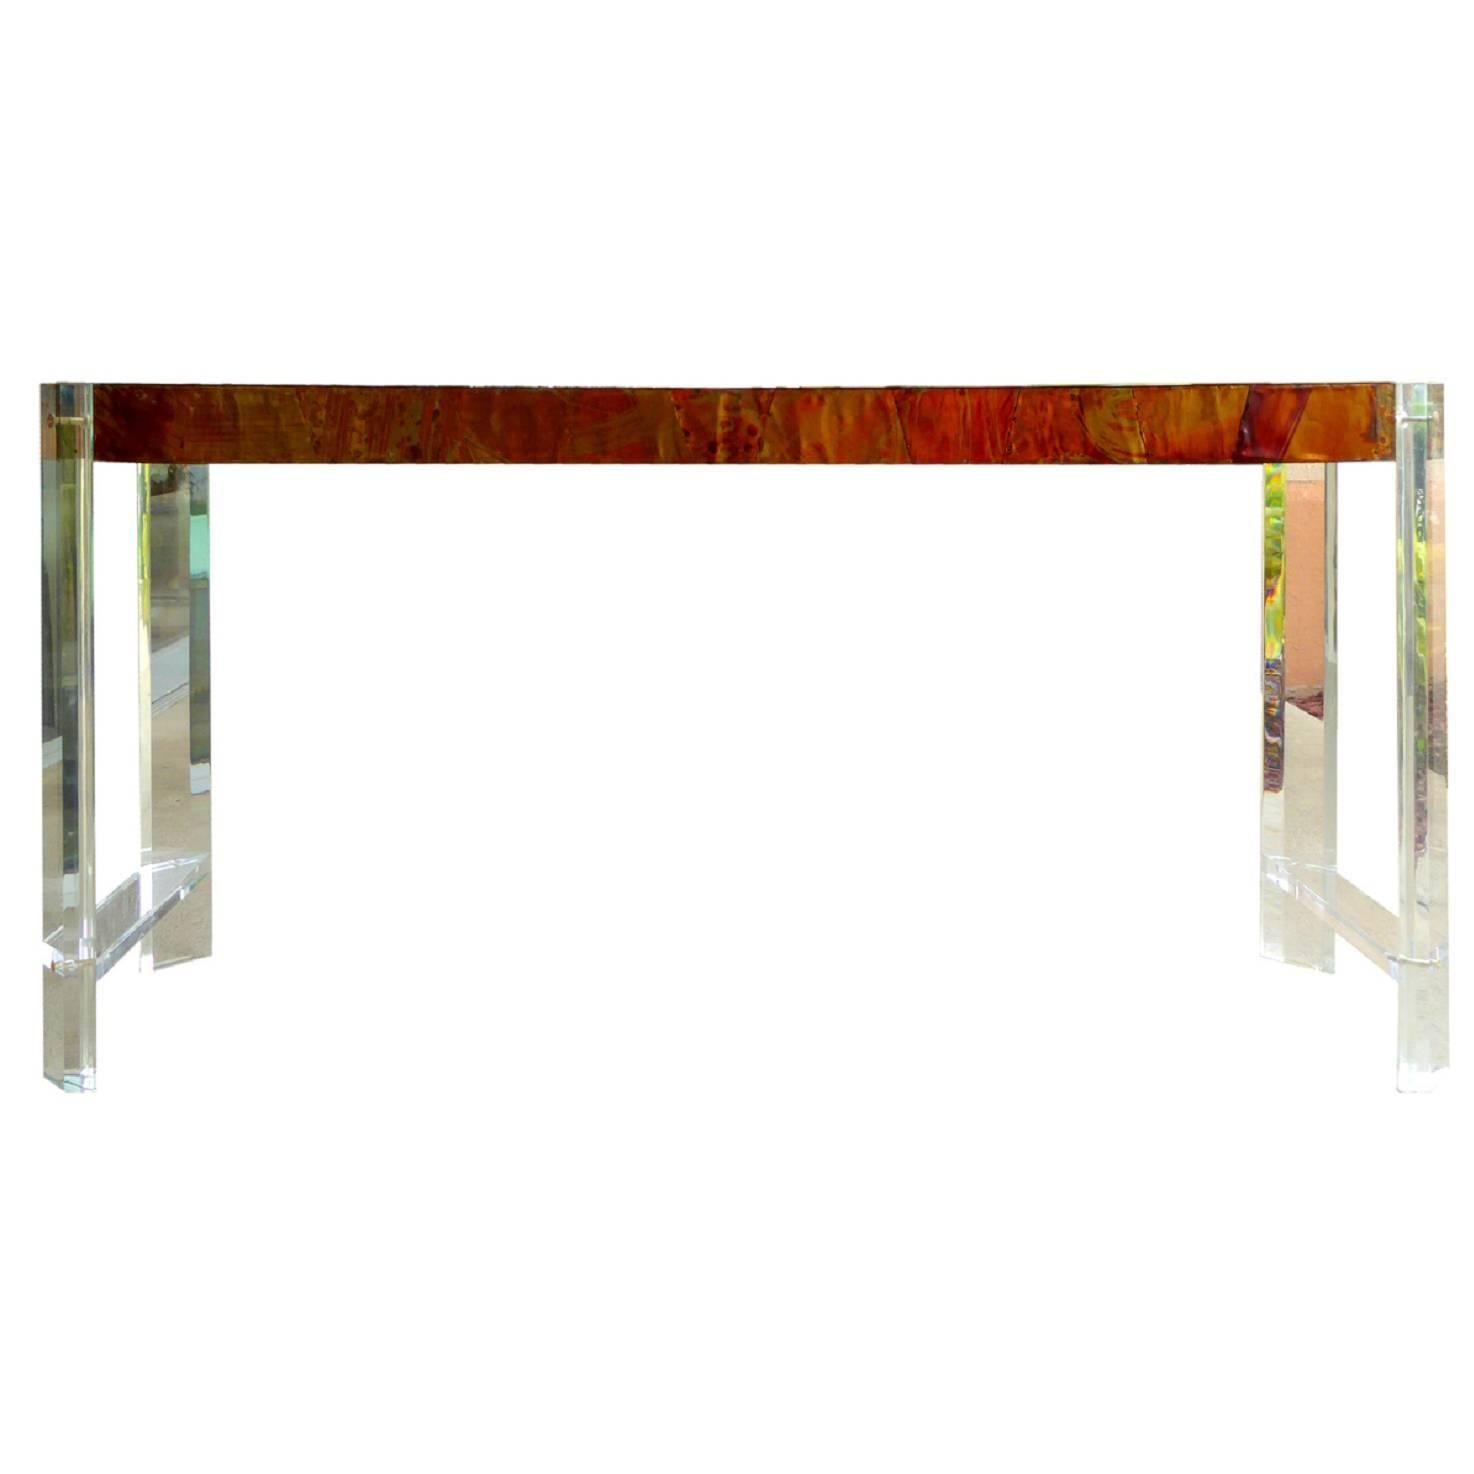 Paul Evans Style Lucite and Copper Console Table